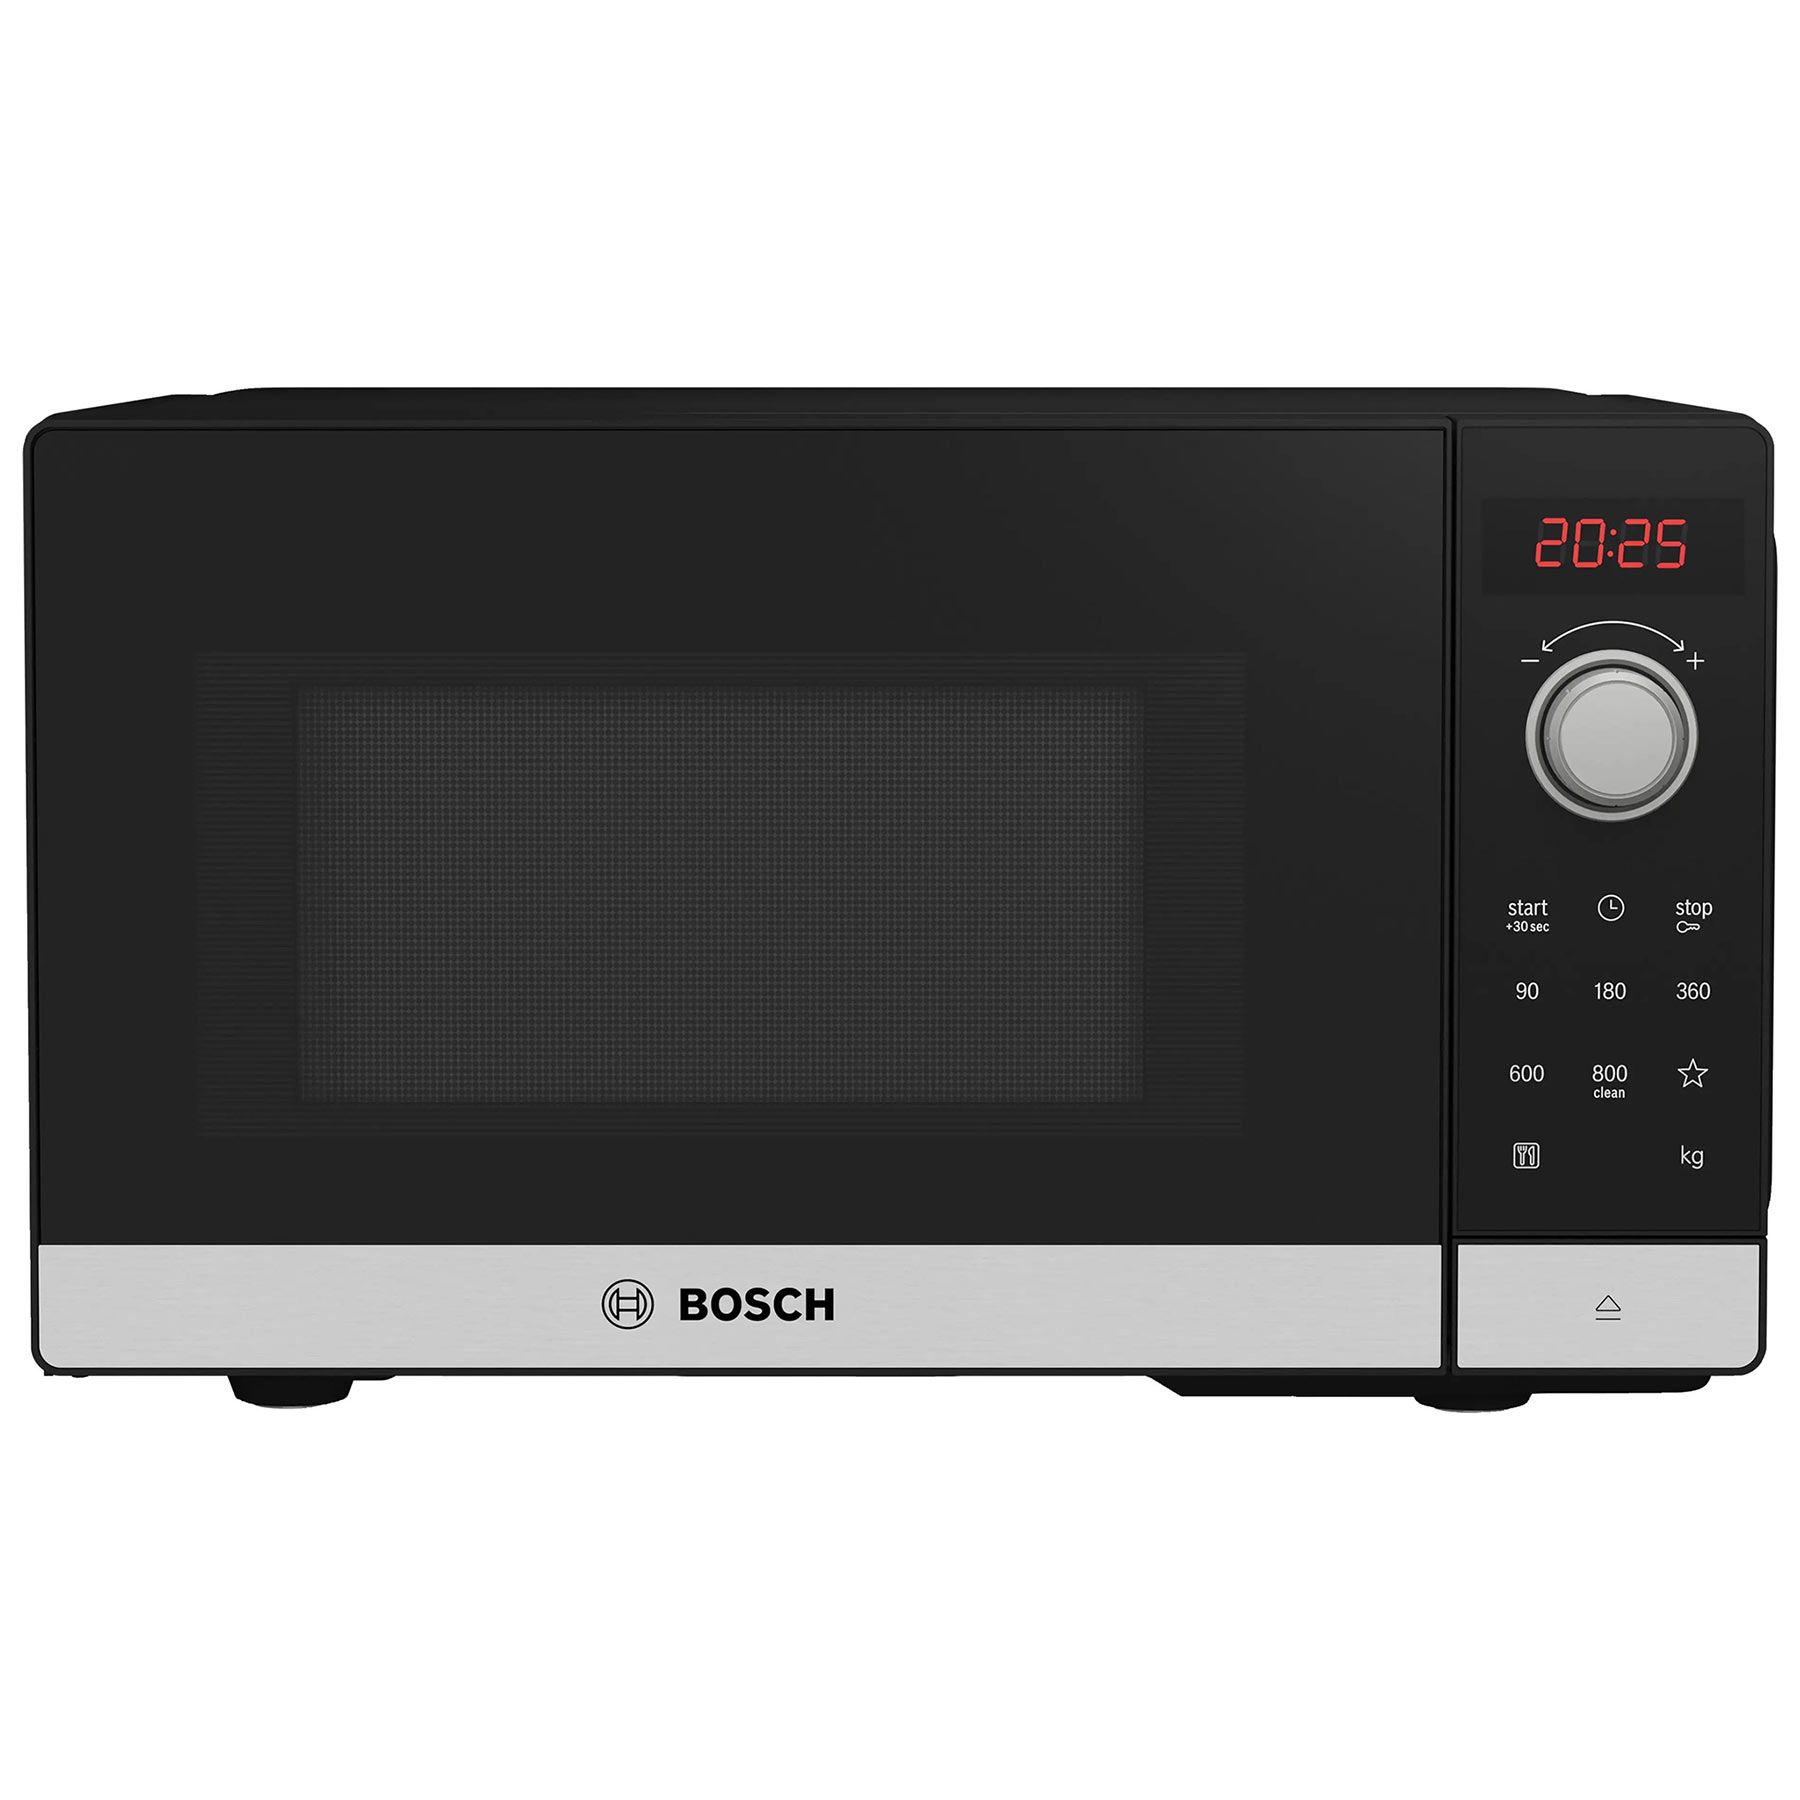 Image of Bosch FFL023MS2B Series 2 Solo Microwave Oven in St Steel 20L 800W